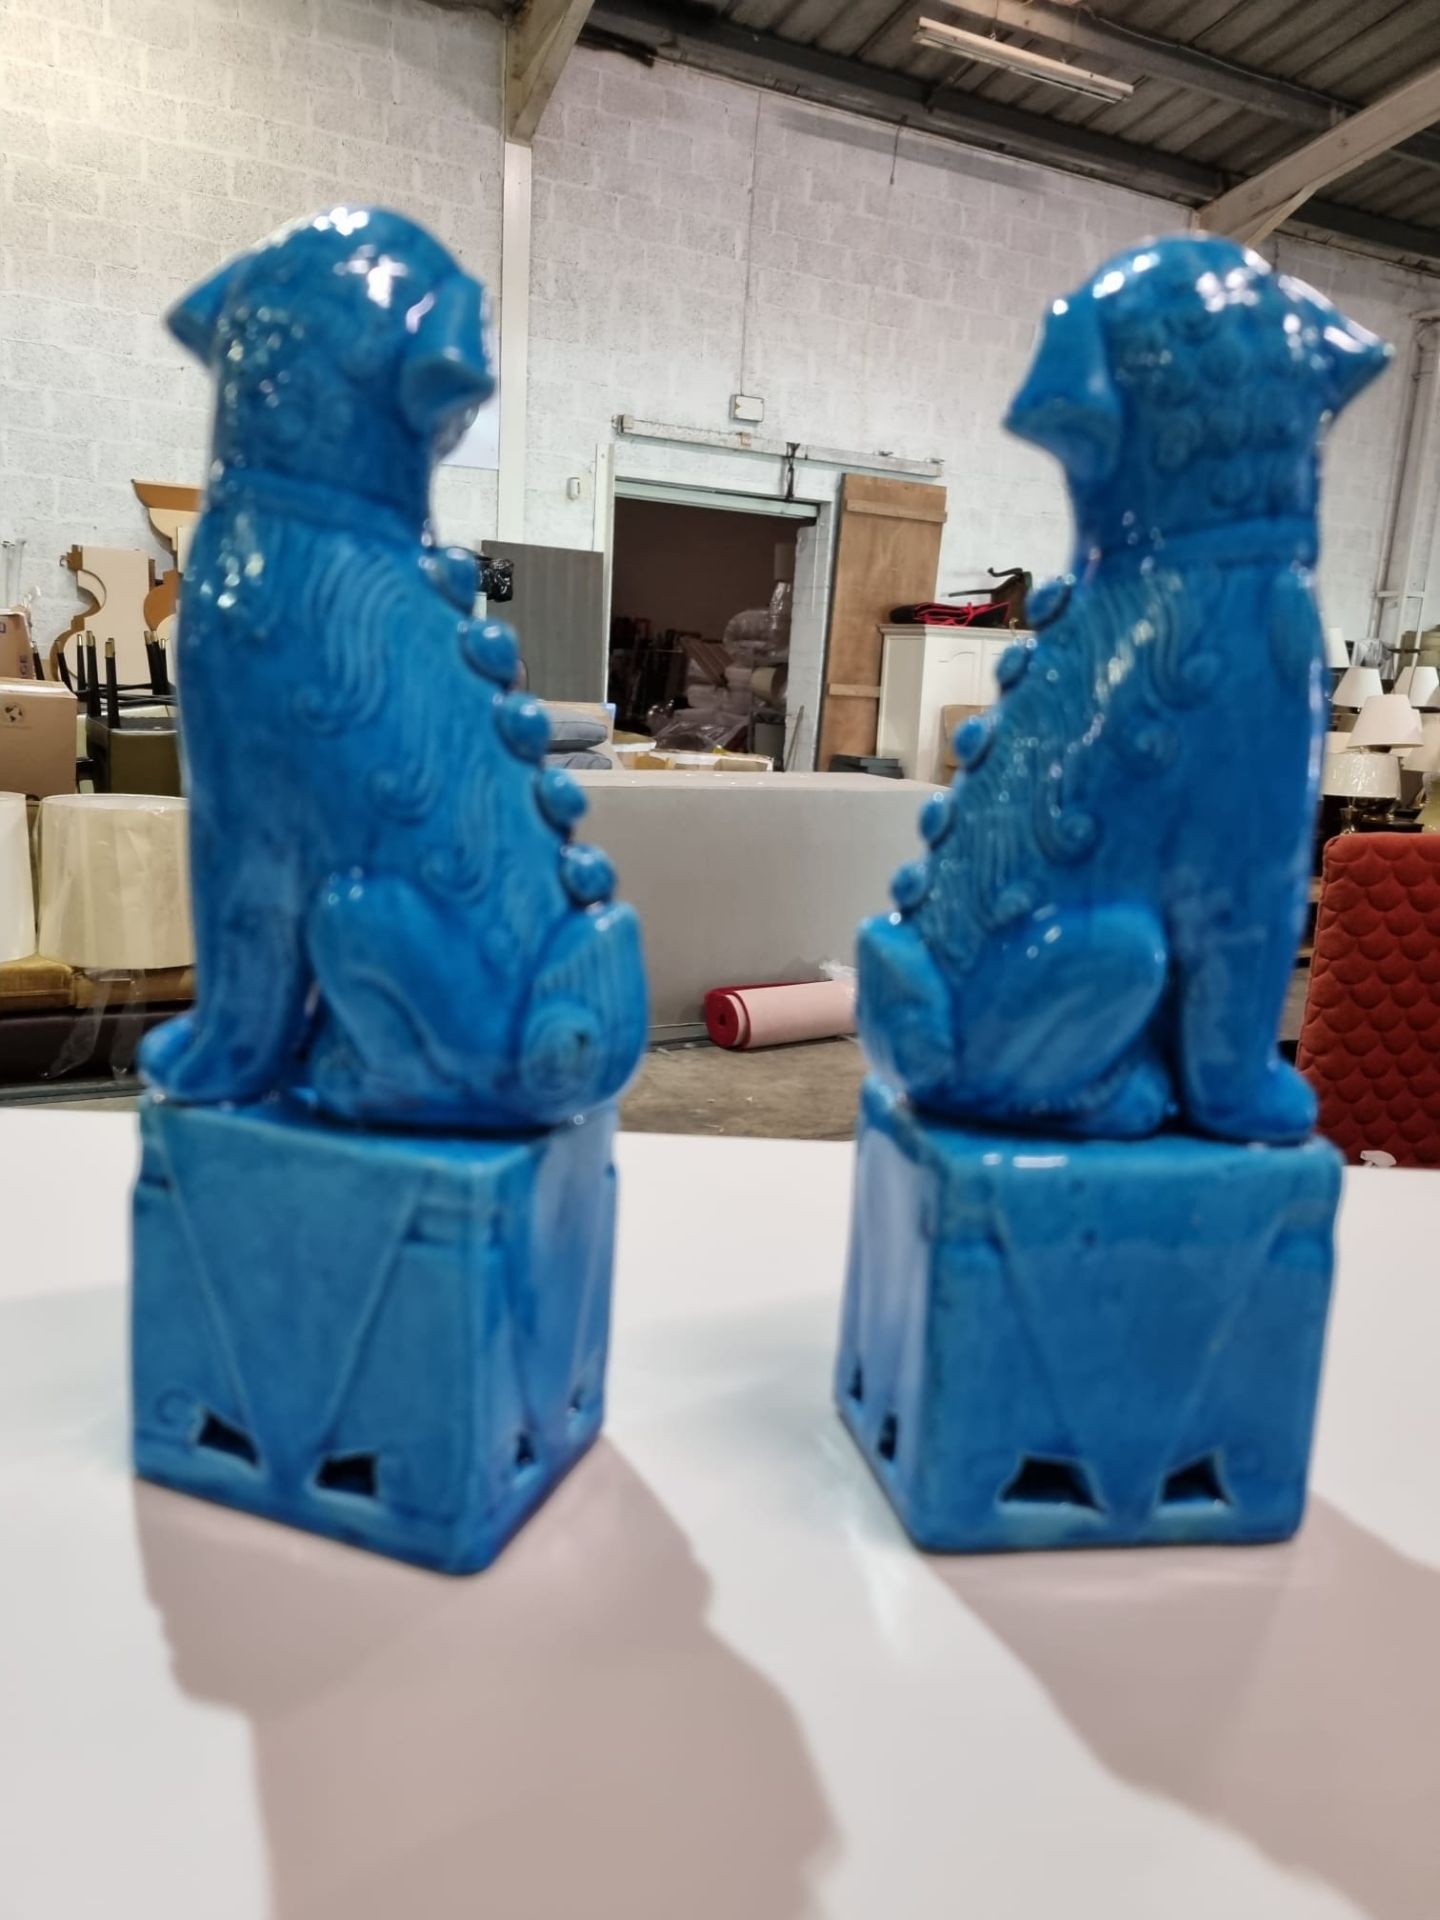 Classic Blue Ceramic Foo Dogs From Nine Schools Turquoise Collection Serve As Both Decorative And - Image 2 of 3